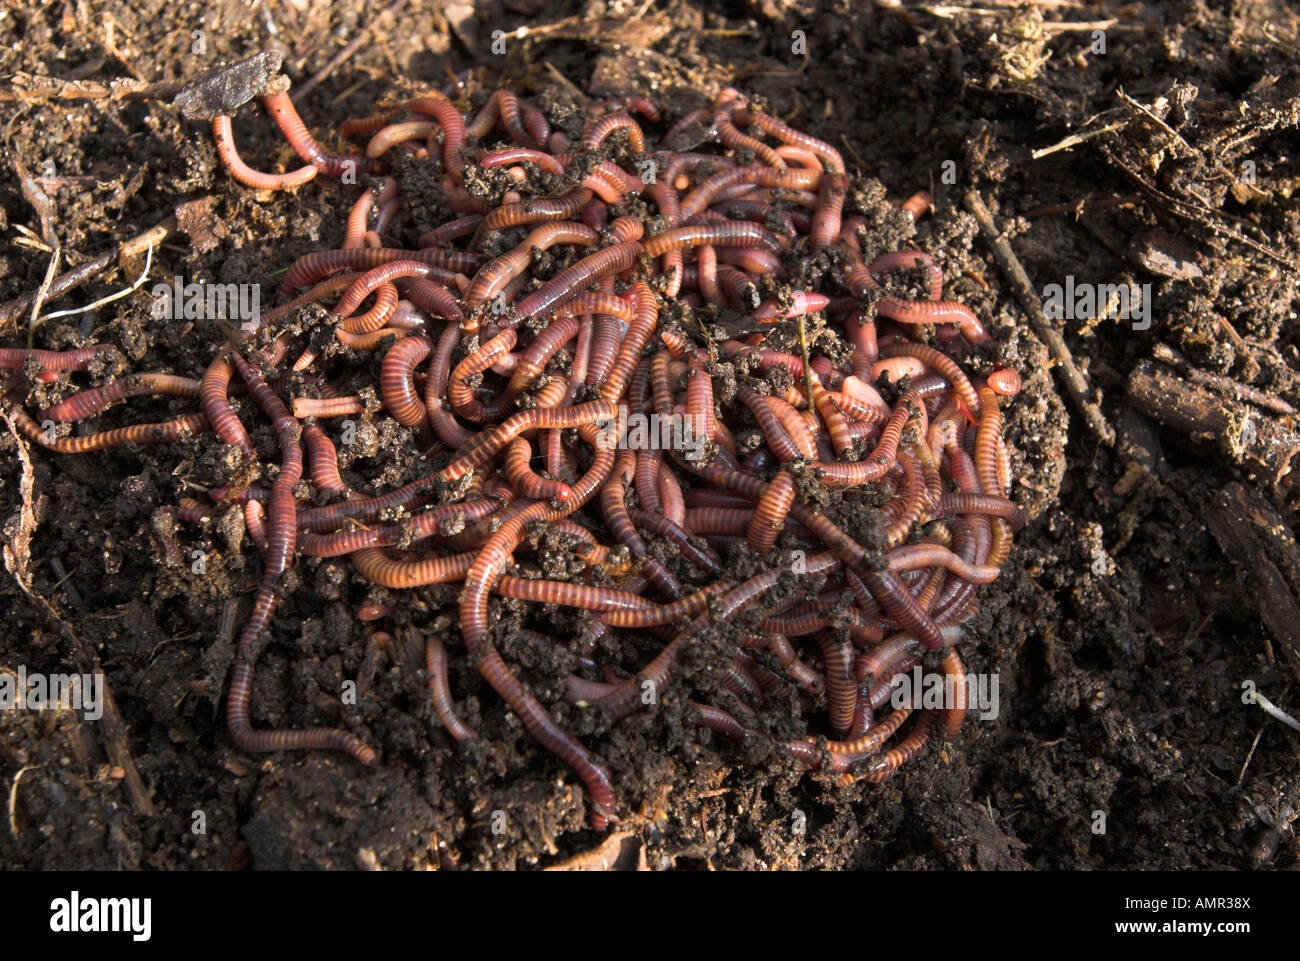 Compost Worms On A Home Garden Heap Stock Photo 15320473 Alamy